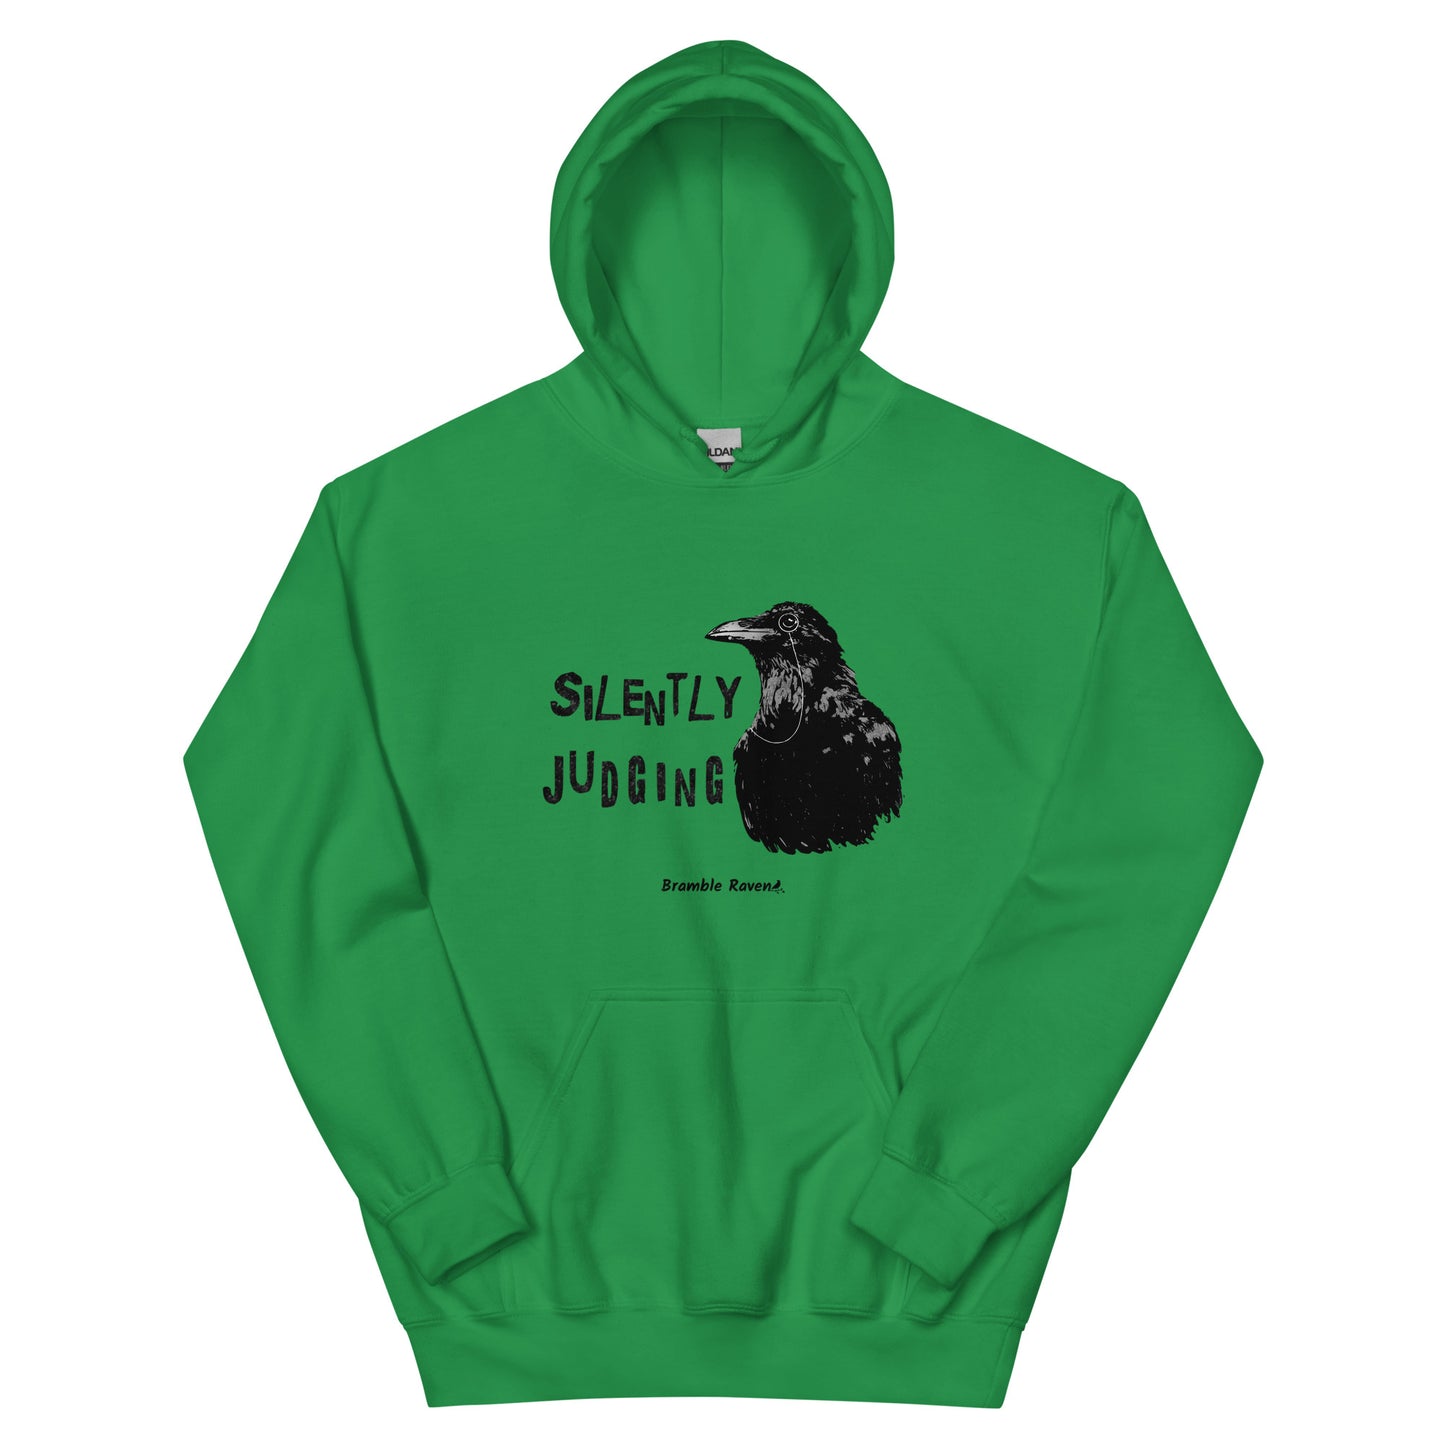 Unisex Irish green colored hoodie with horizontal design of silently judging text by black crow wearing a monocle.  Design on the front of hoodie. Features double-lined hood and front pouch pocket.